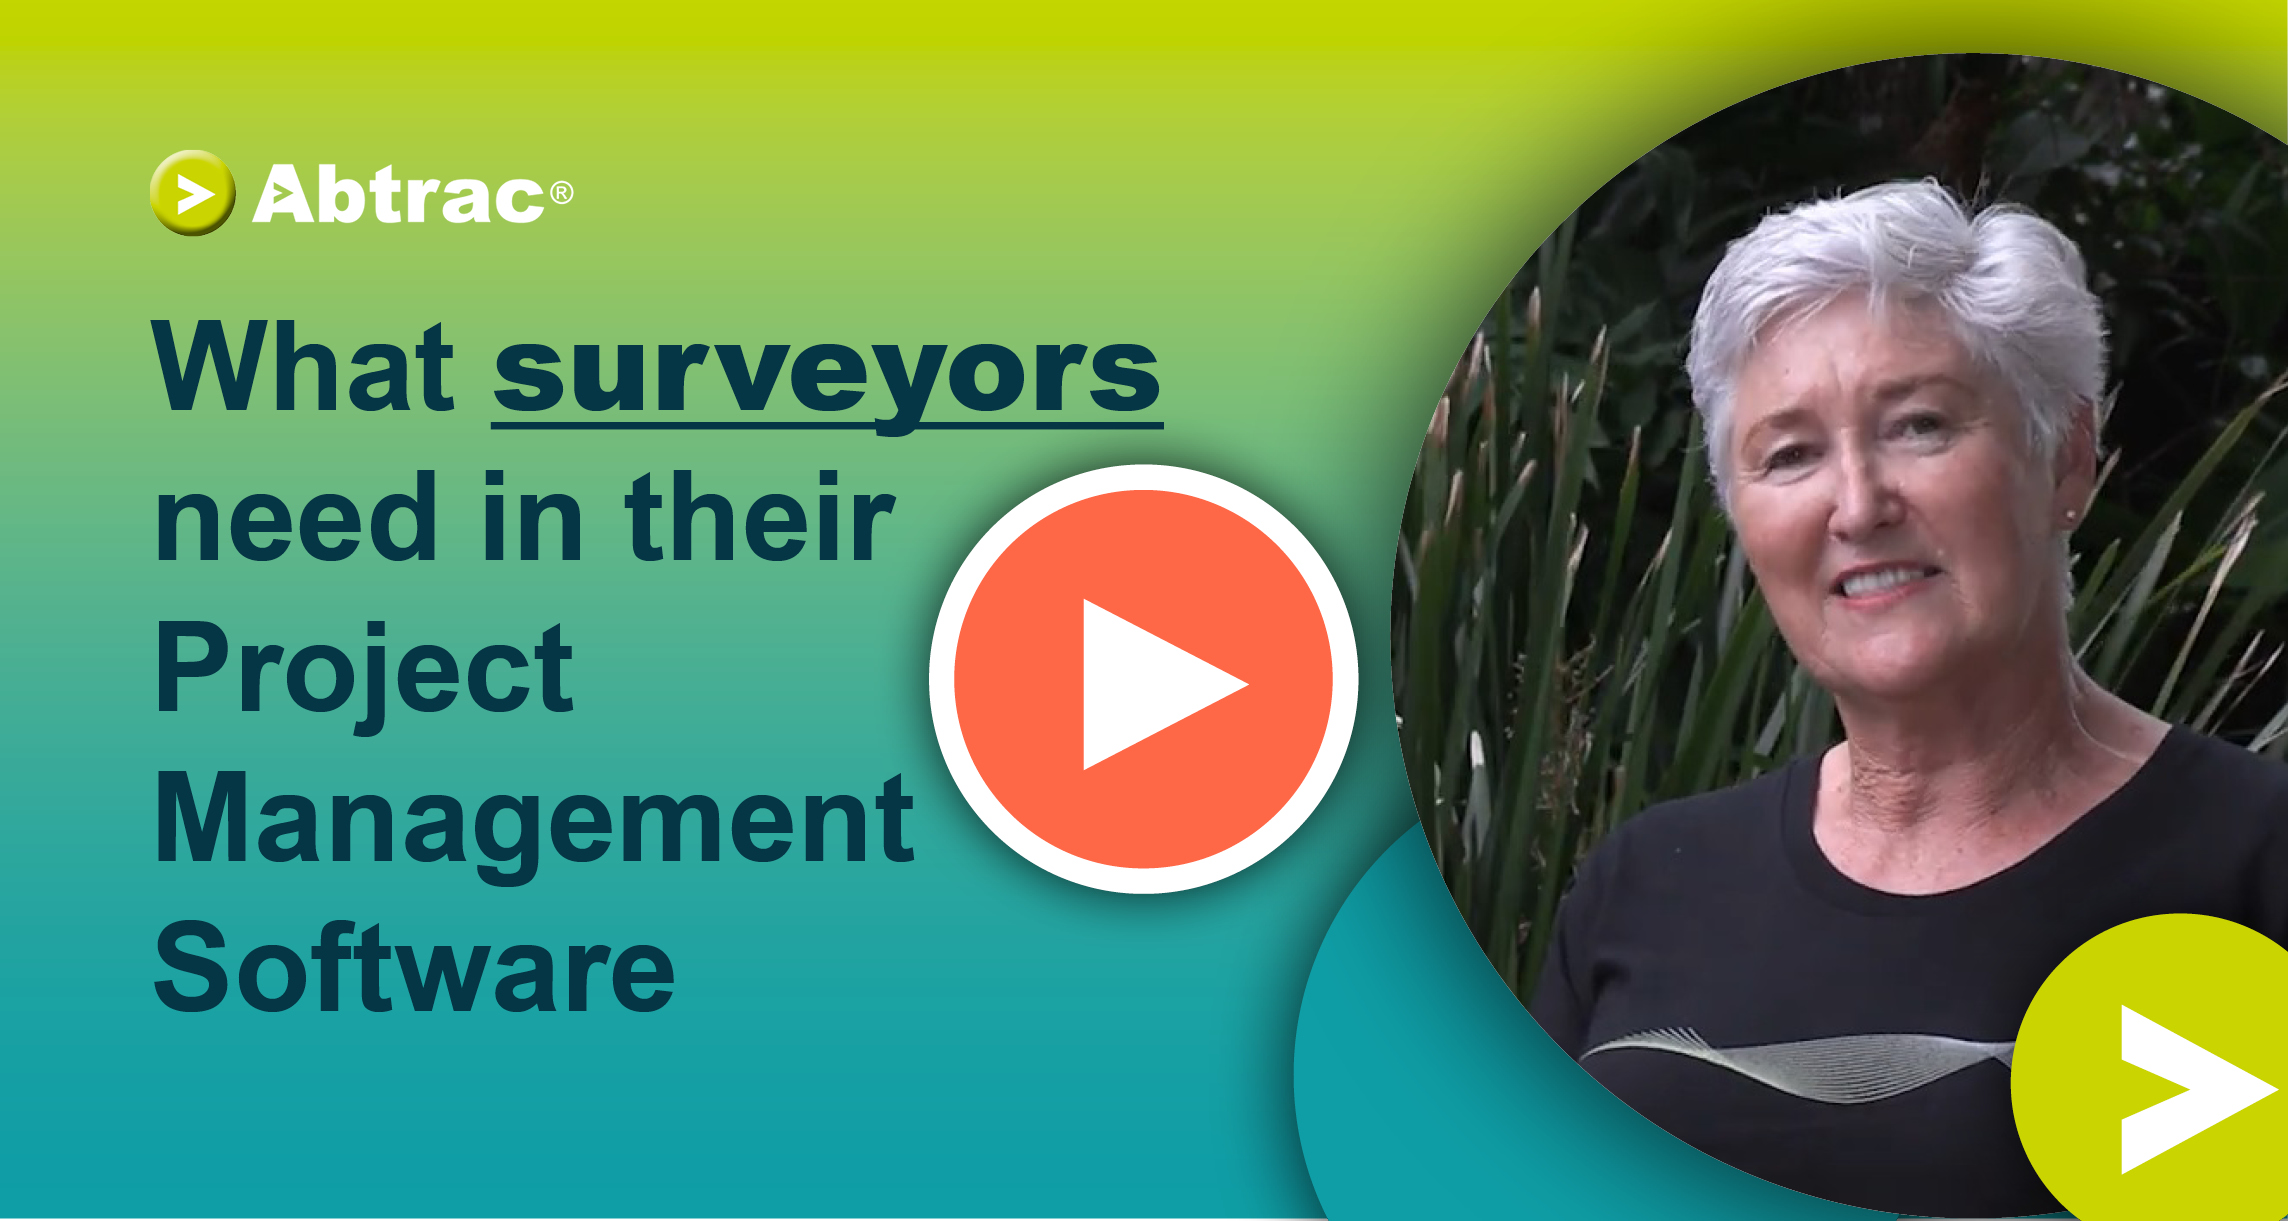 Video on Project Management Software for Surveyors